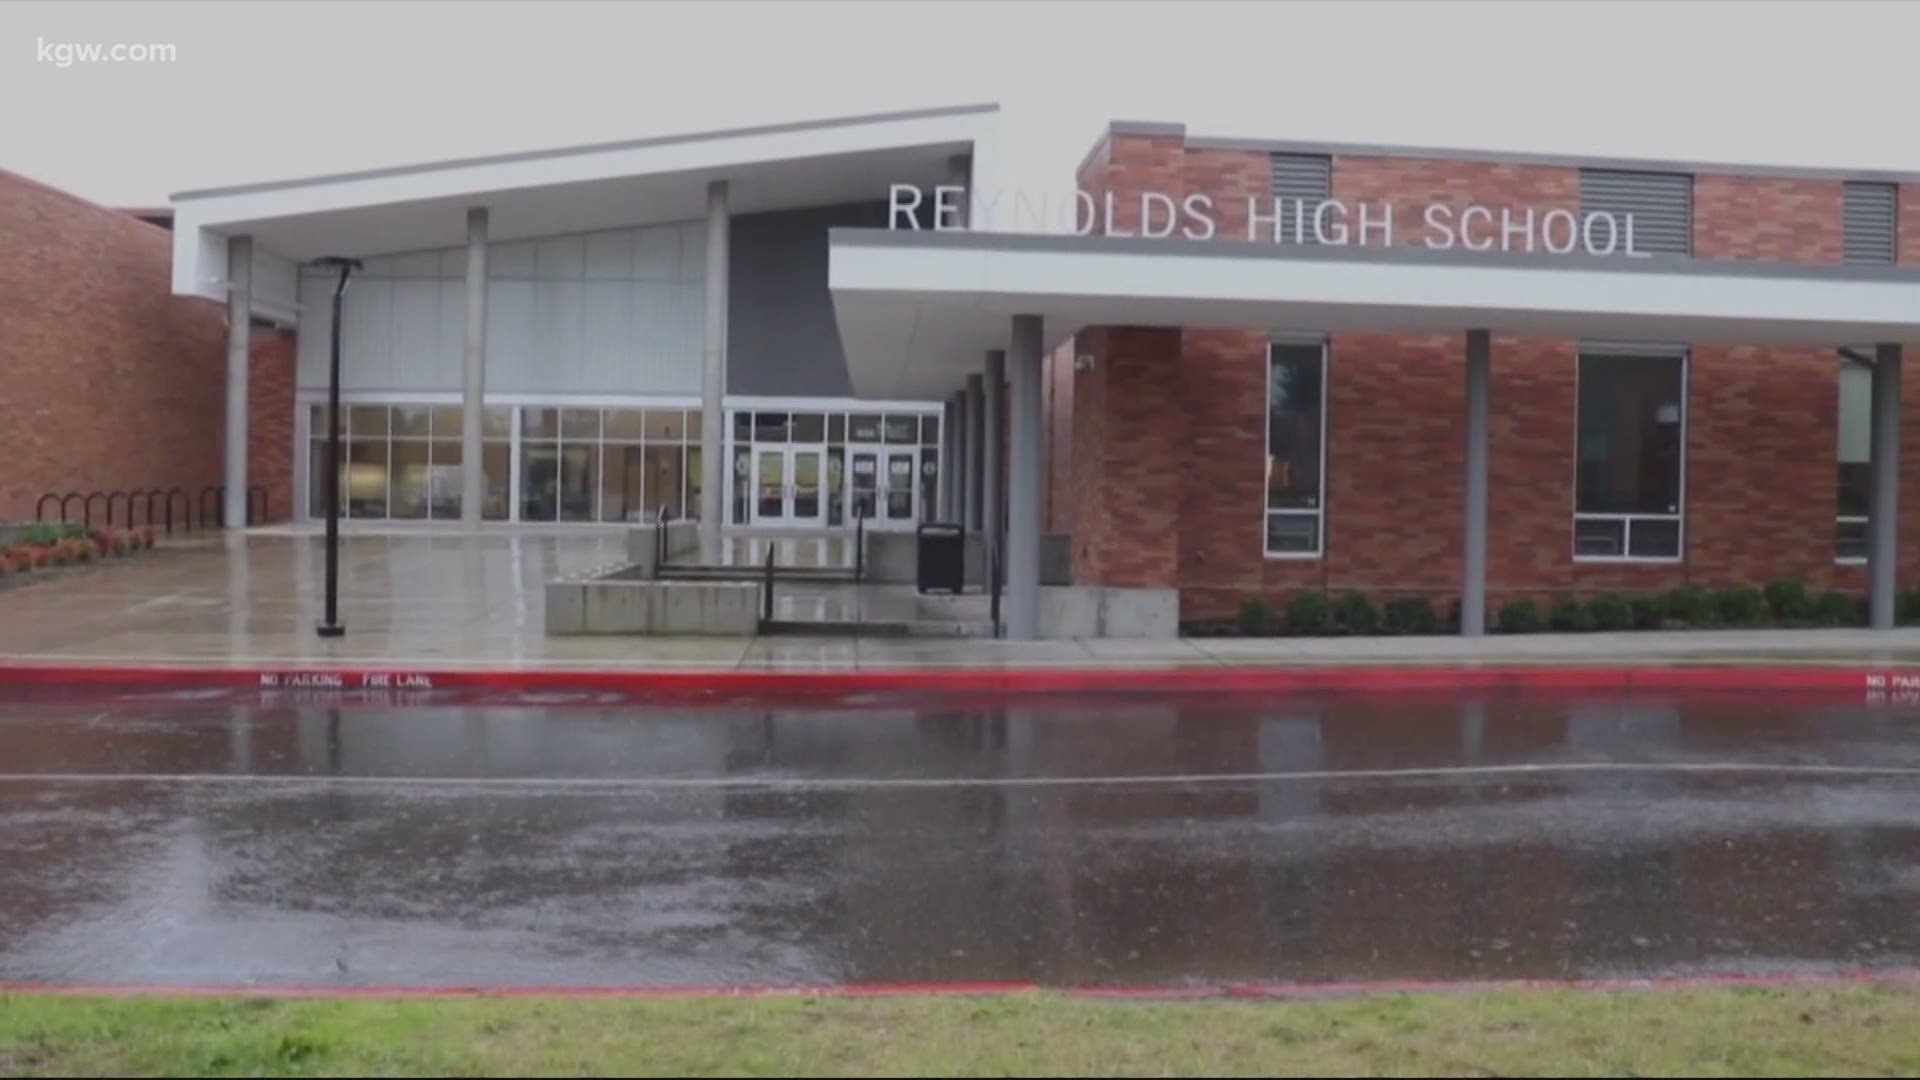 A new student health center is open at Reynolds High School in Troutdale.